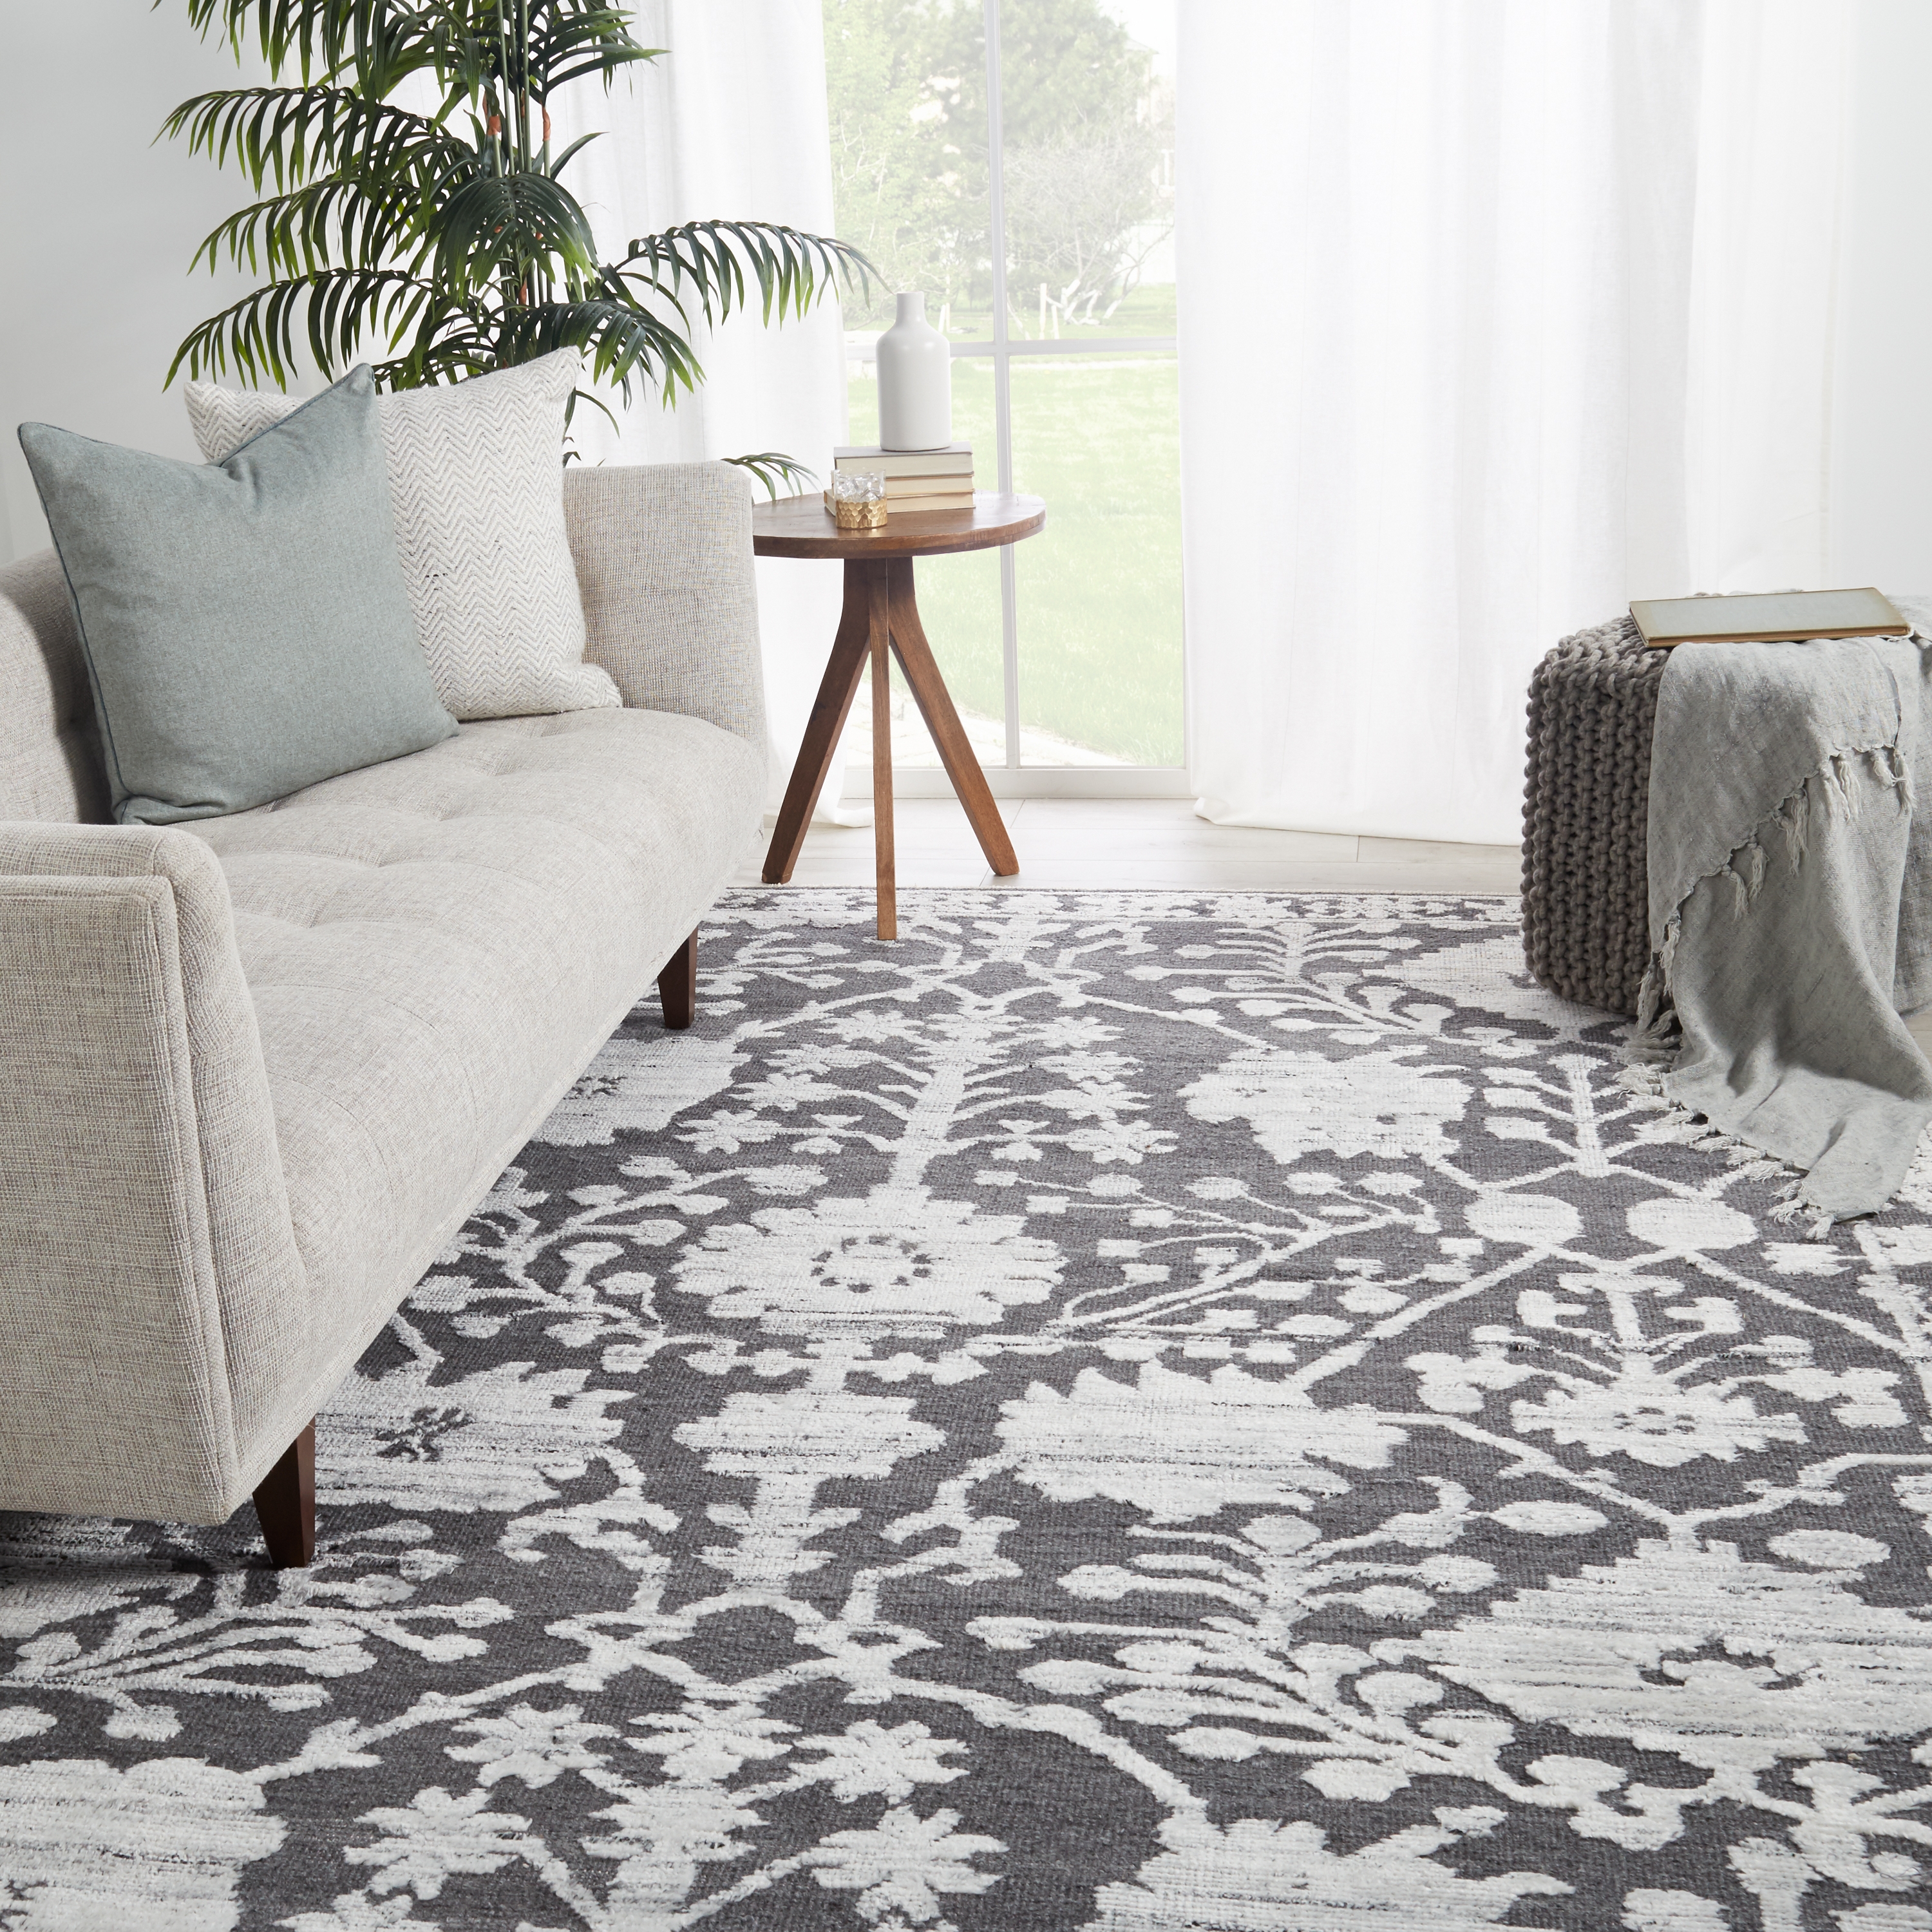 Riona Hand-Knotted Floral Gray/ White Area Rug (6'X9') - Image 4